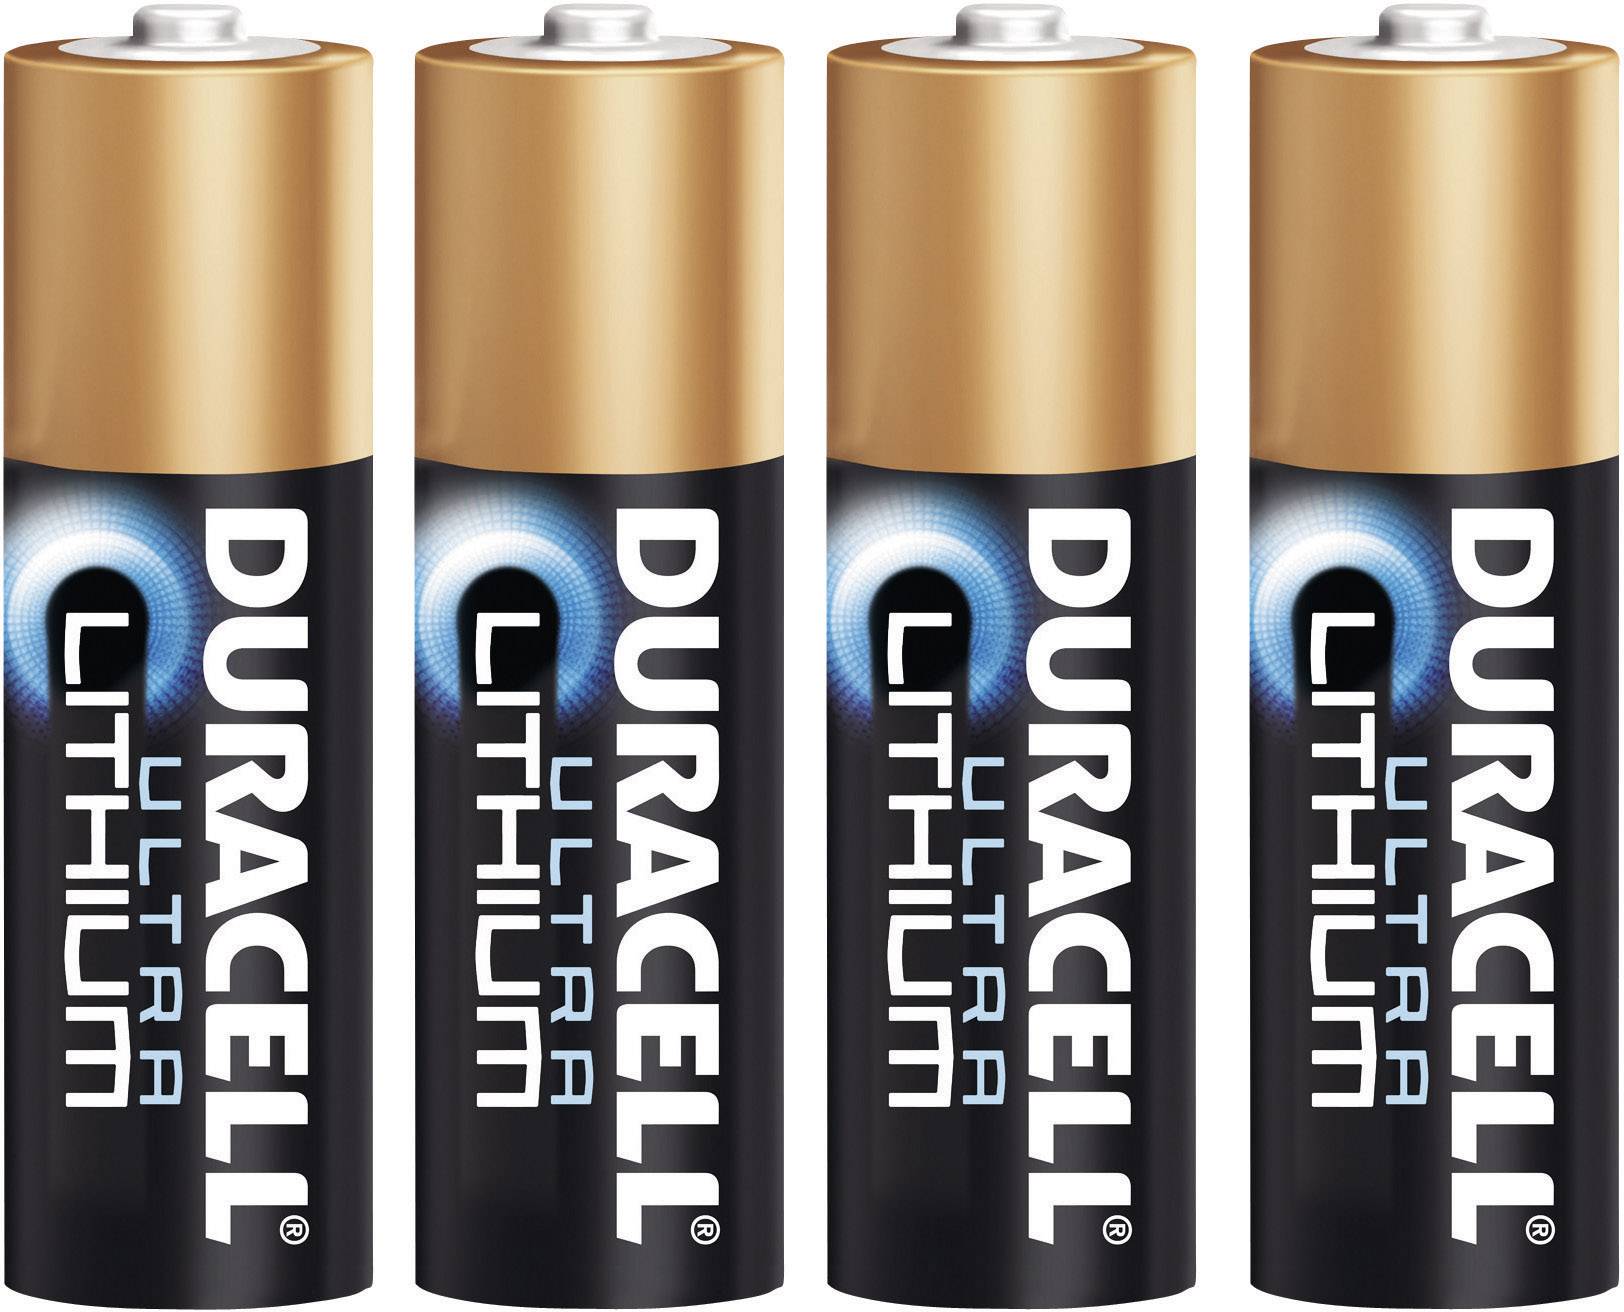 3.6 v aa lithium batteries